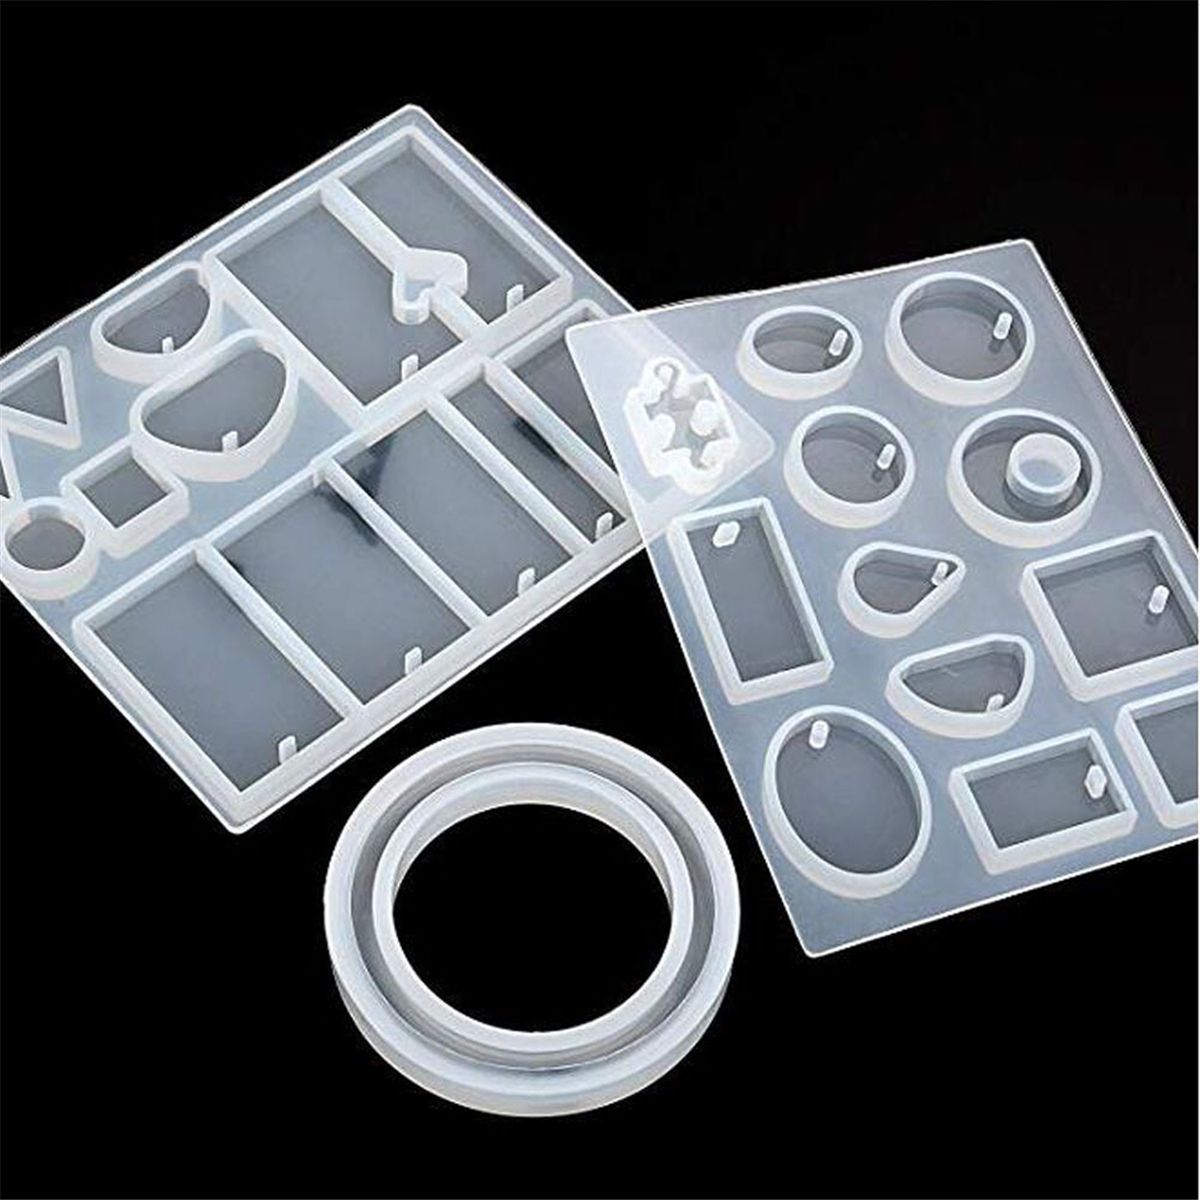 213pcs-Resin-Casting-Mold-Kit-Silicone-For-Necklace-DIY-Jewelry-Pendant-Craft-Making-Gadget-1409949